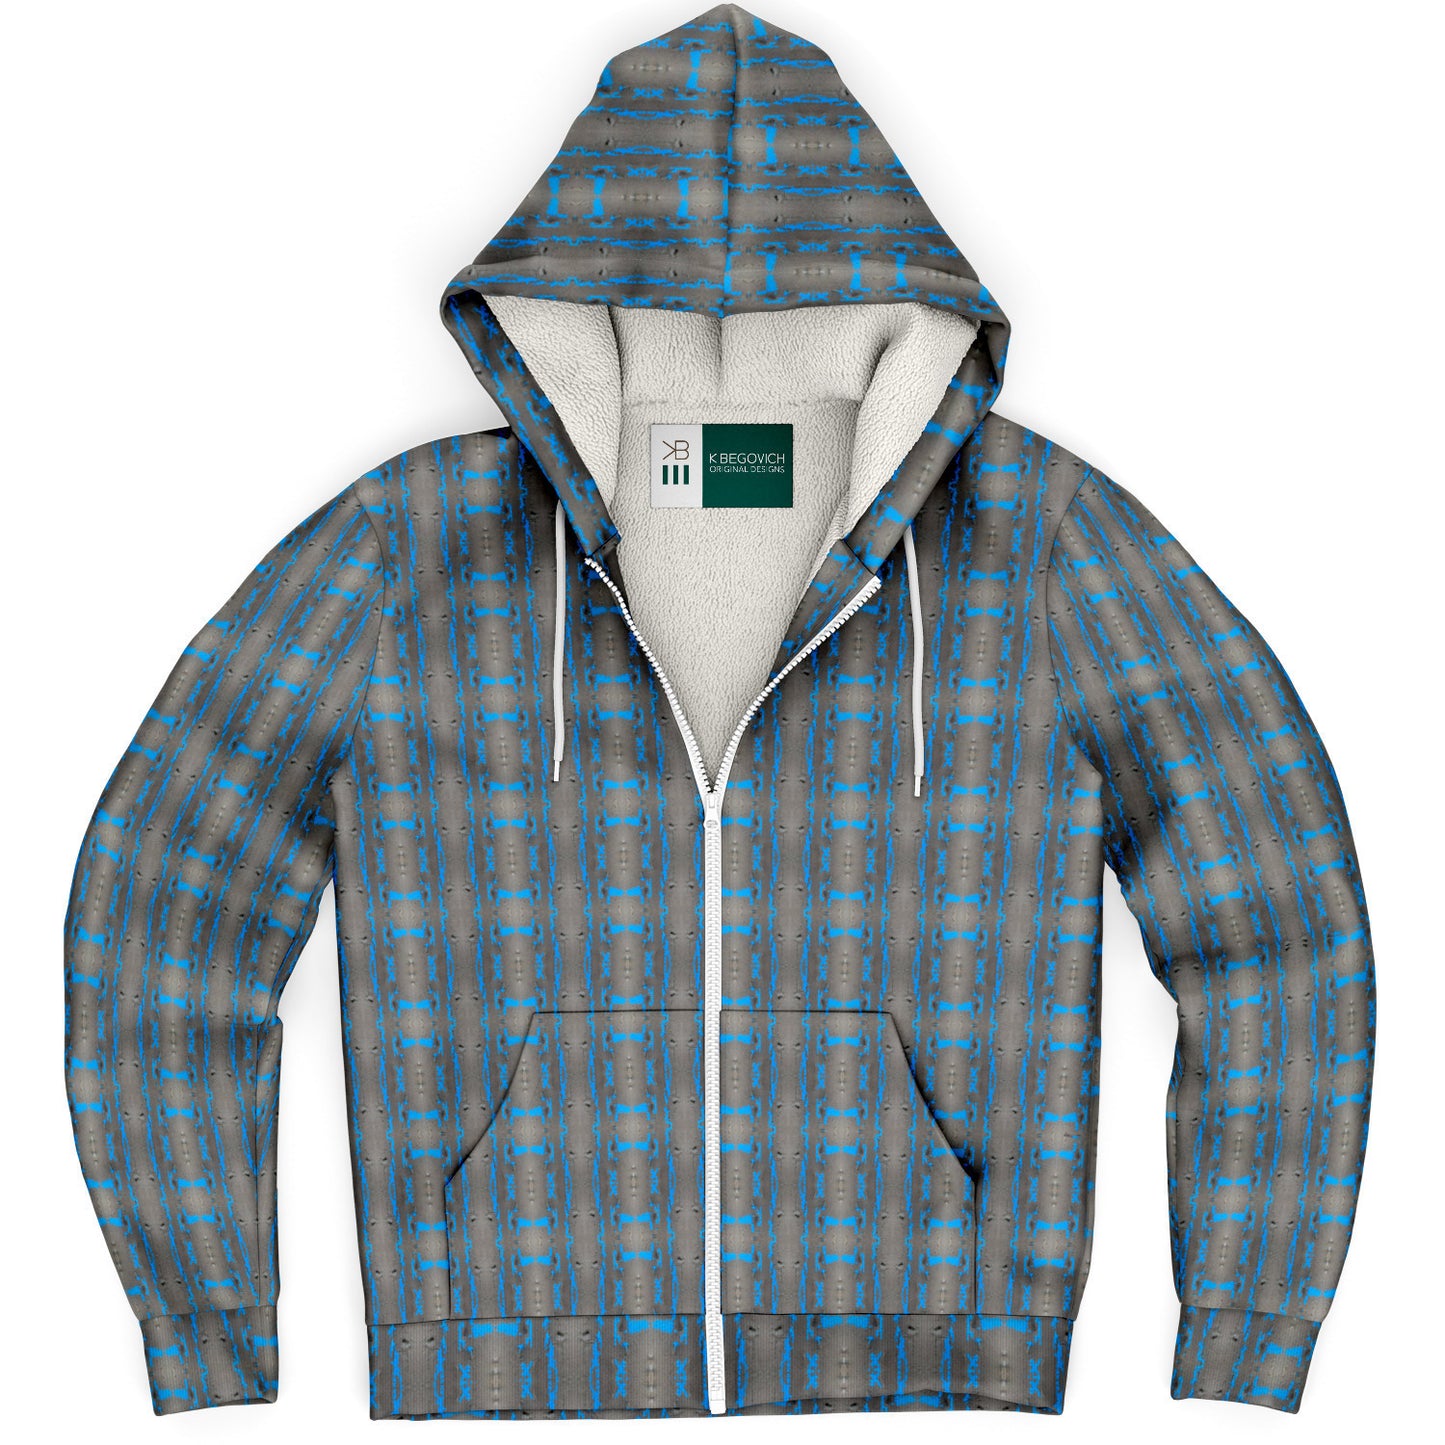 Lined Zip Hoodie (Turquoise No. 2)